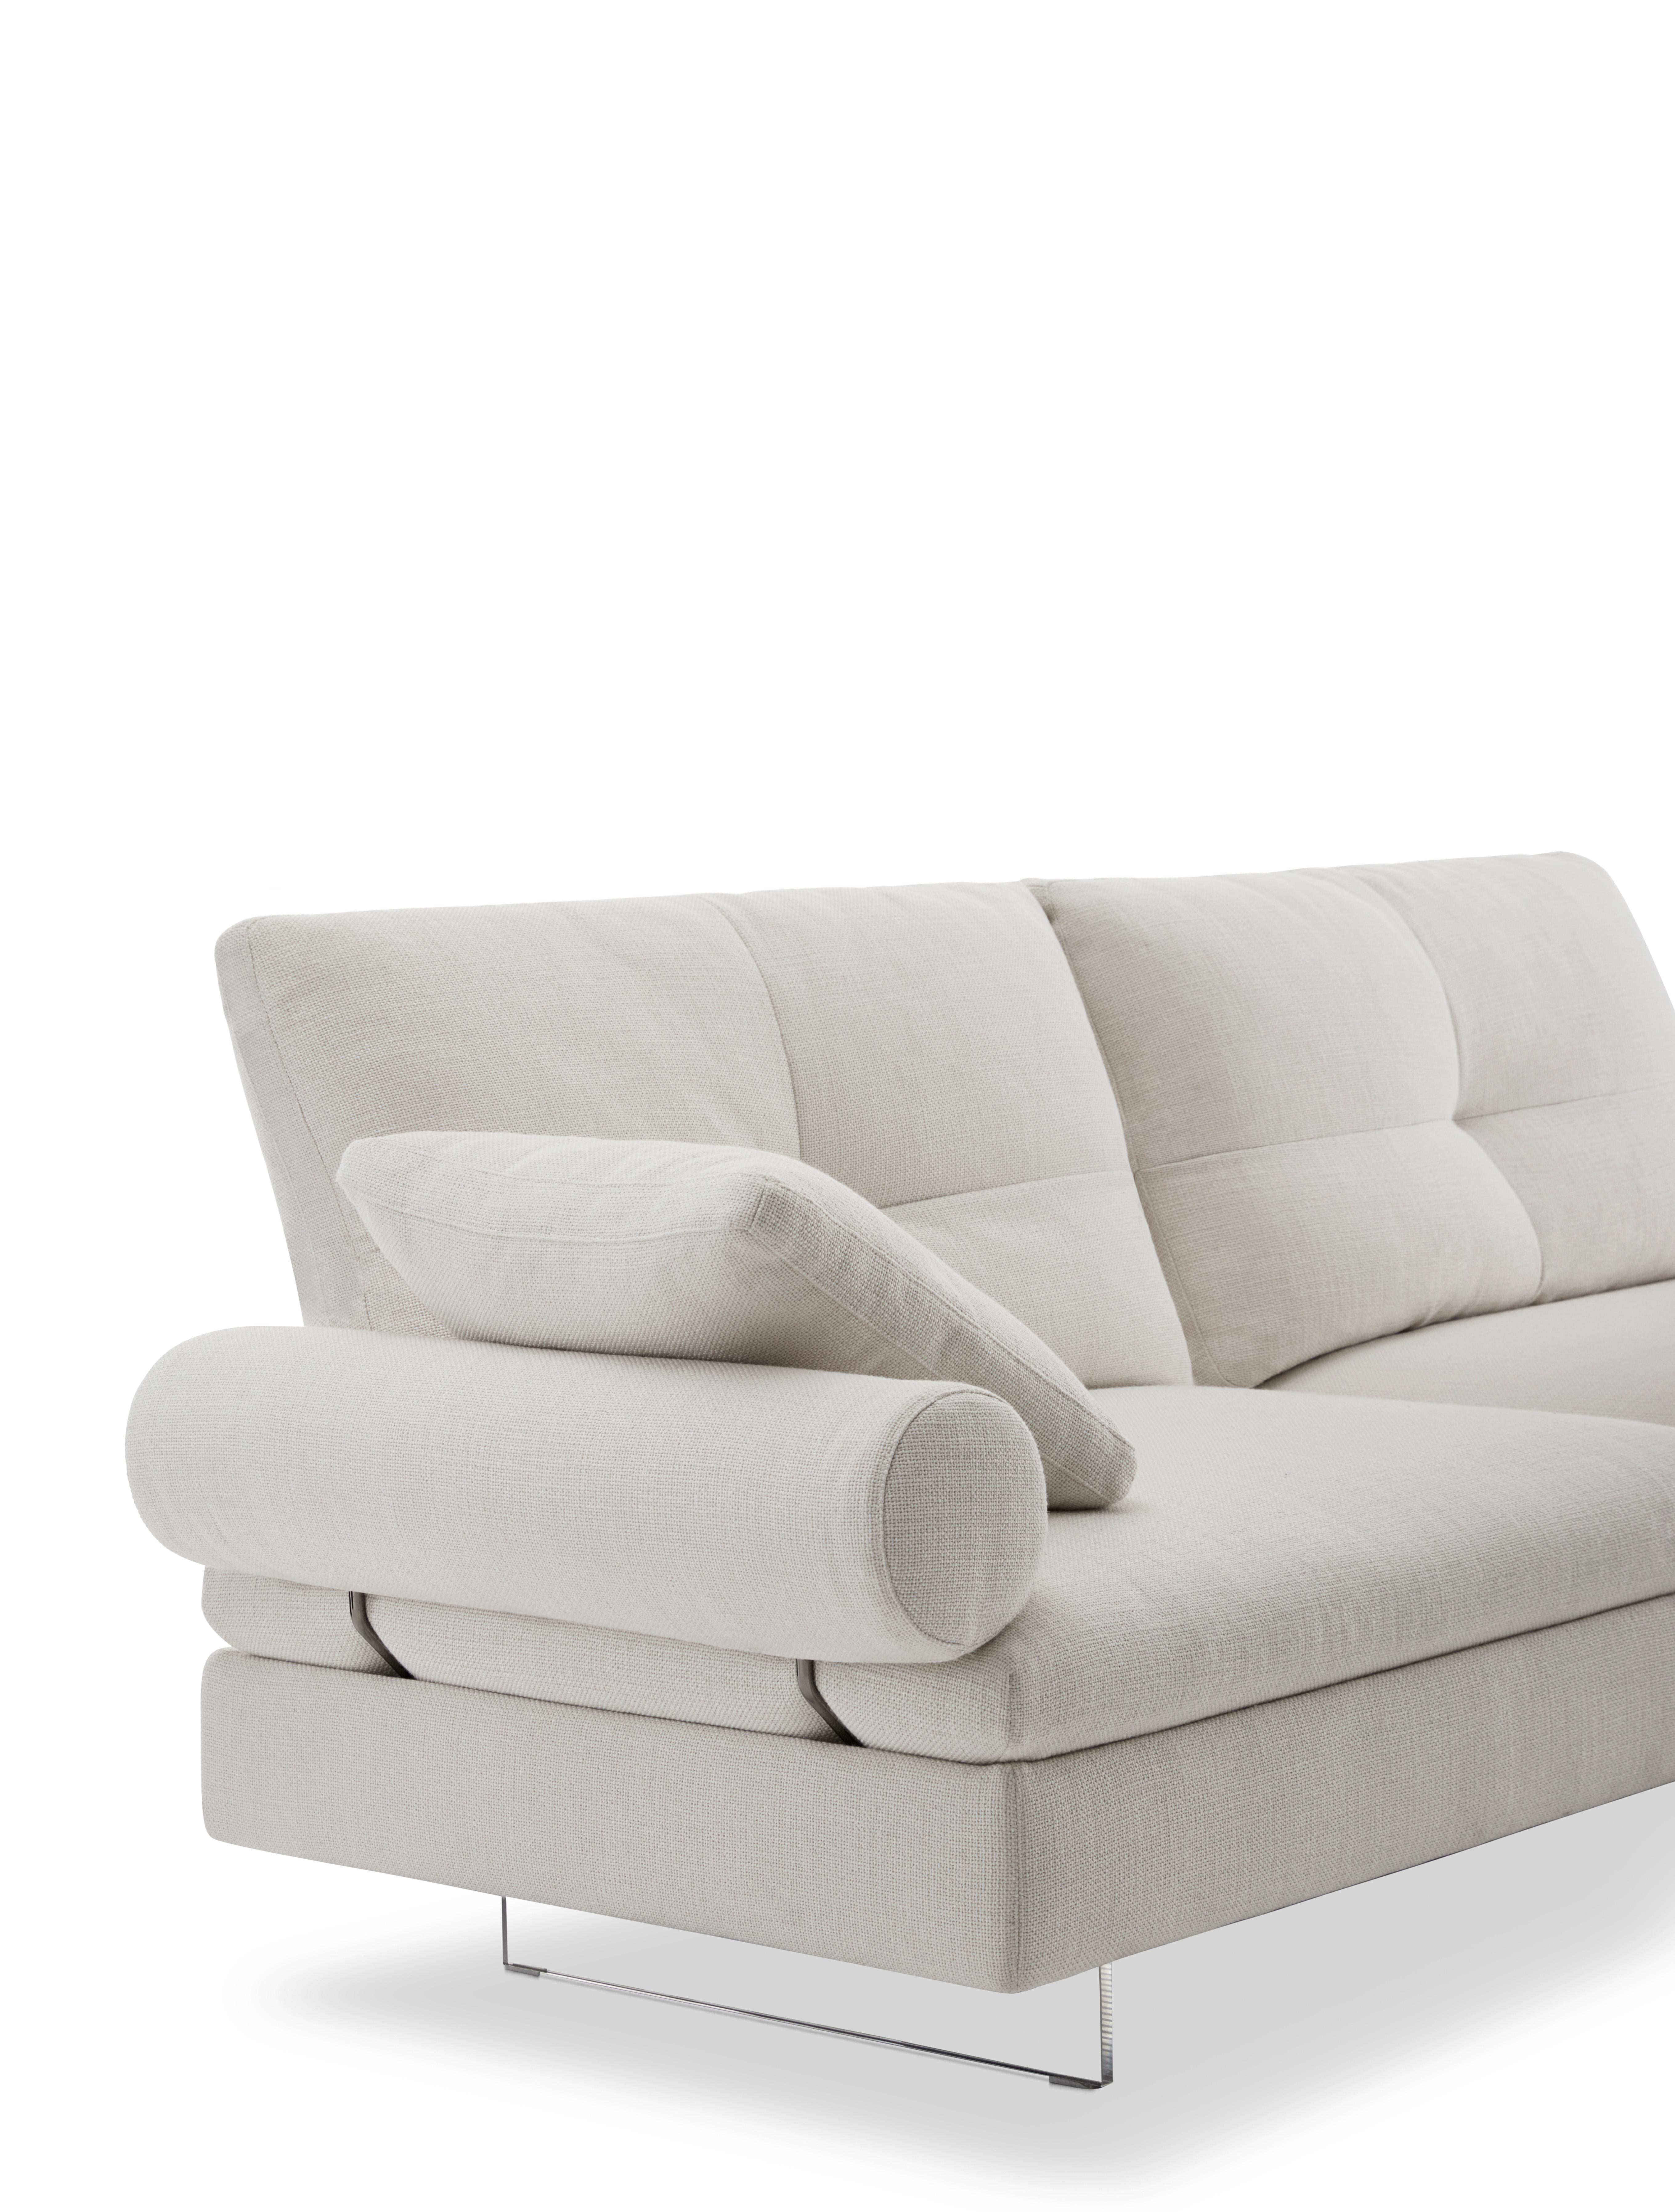 Modern Limes New 88 Medium Sofa in Beige Upholstery with Roll Armrest by Sergio Bicego For Sale